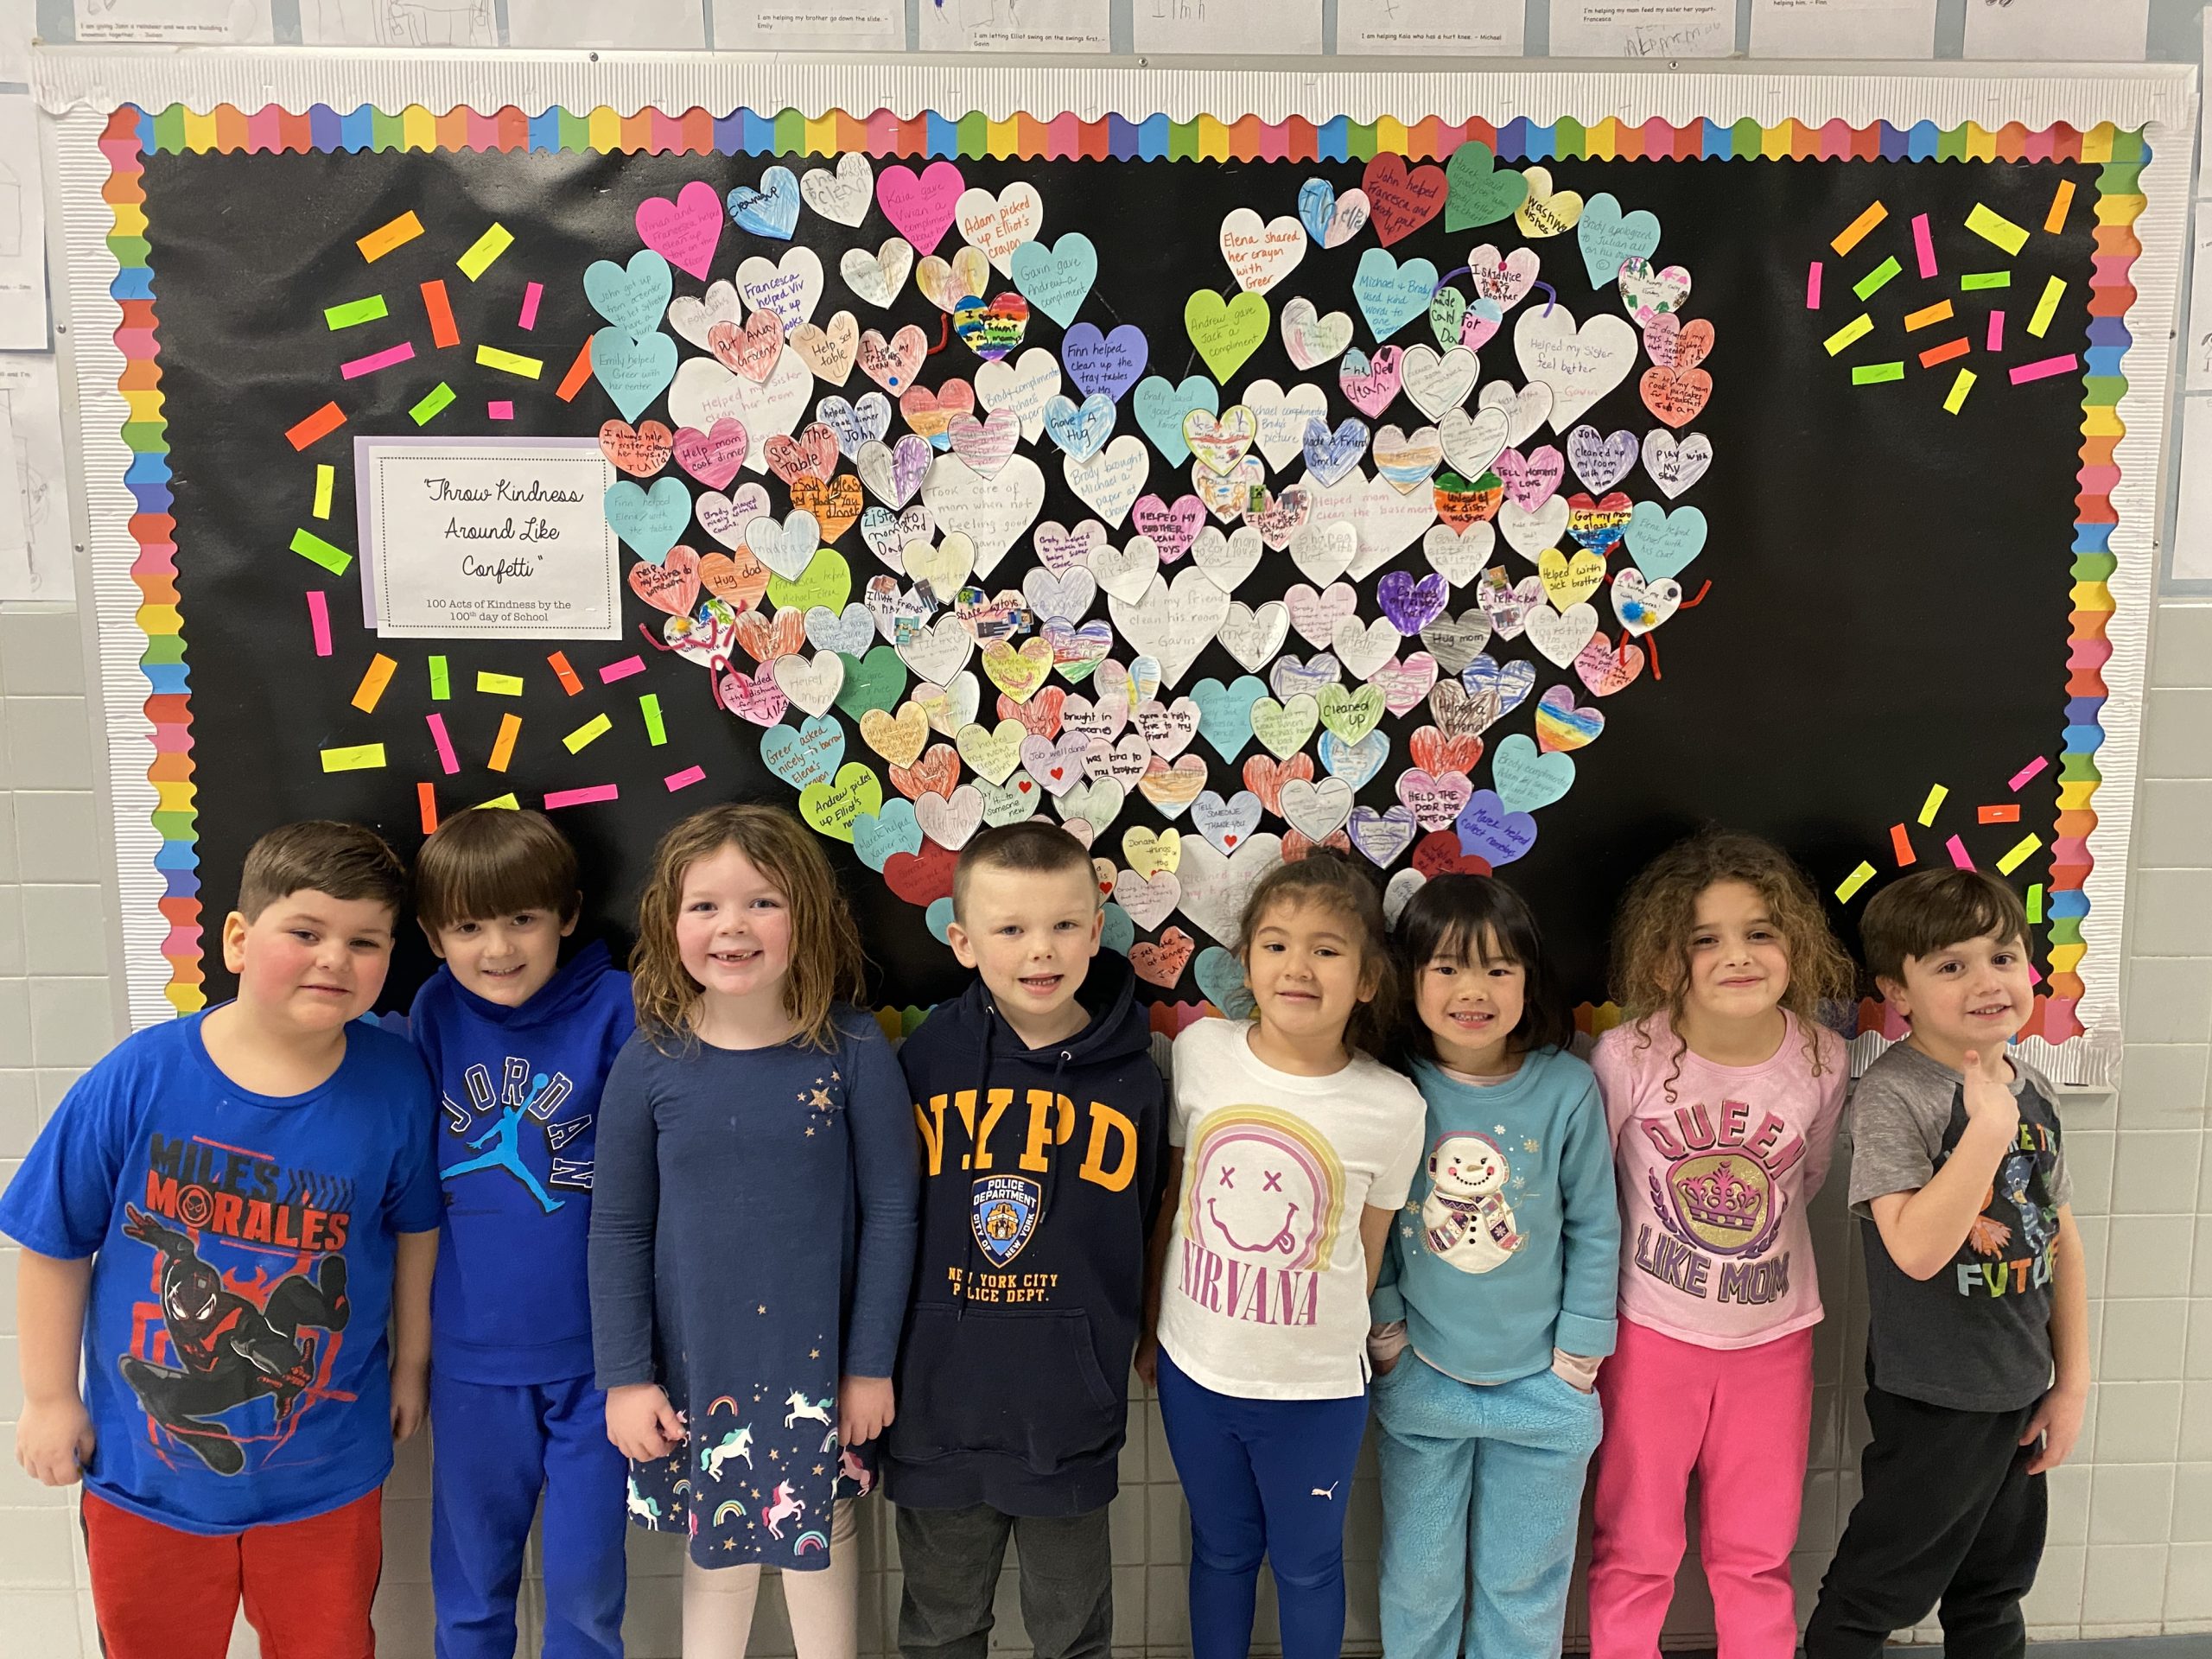 100 Acts of Kindness at Valley Road School